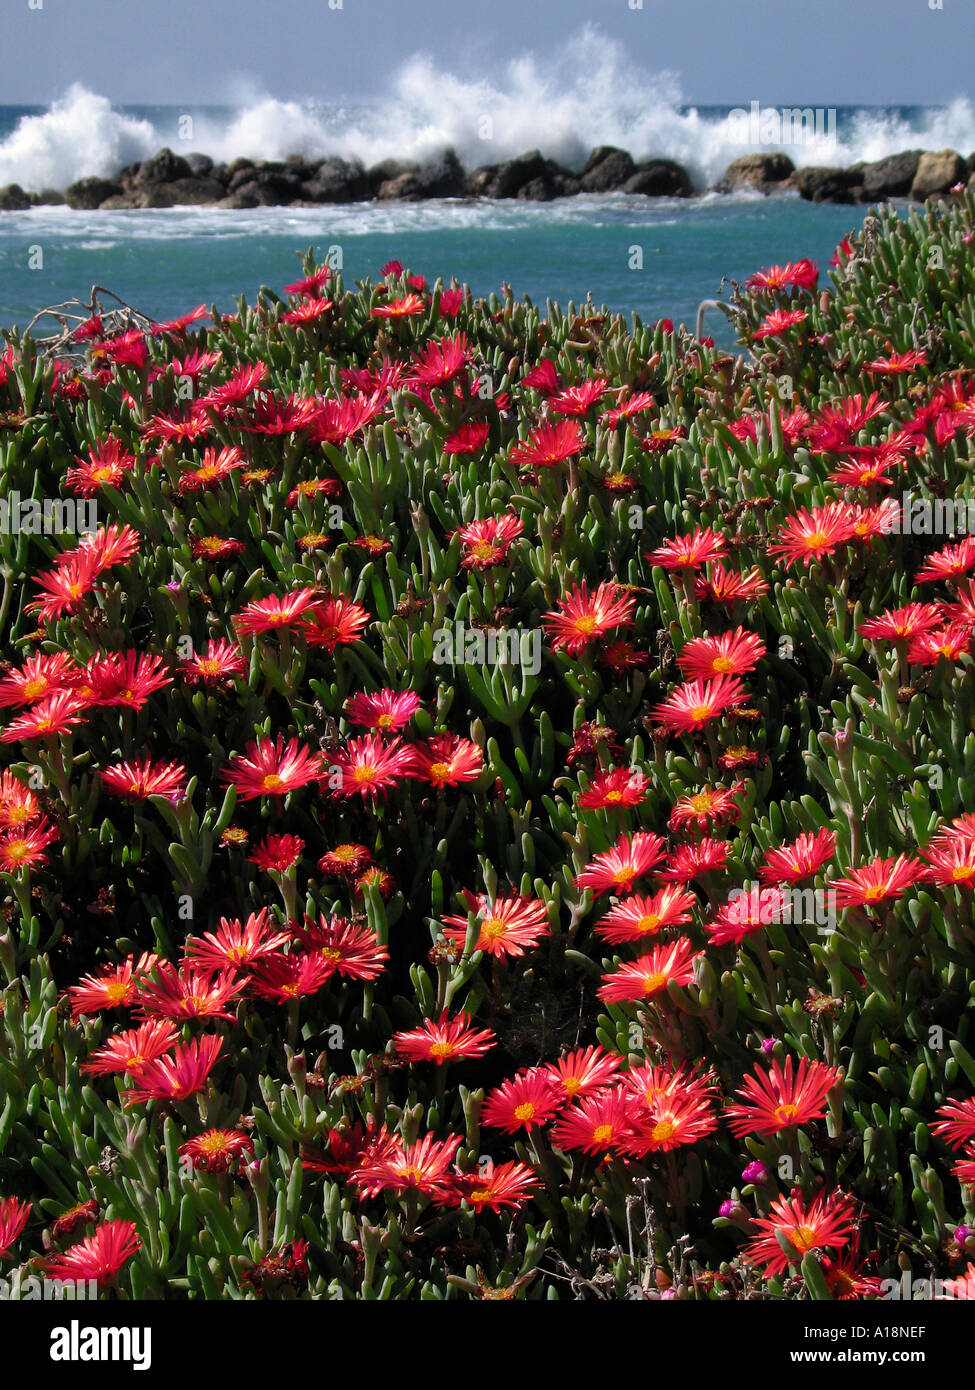 Vivid daisy like flowers growing on rocks on a beach in Southern Cyprus with the sea crashing in the background Stock Photo